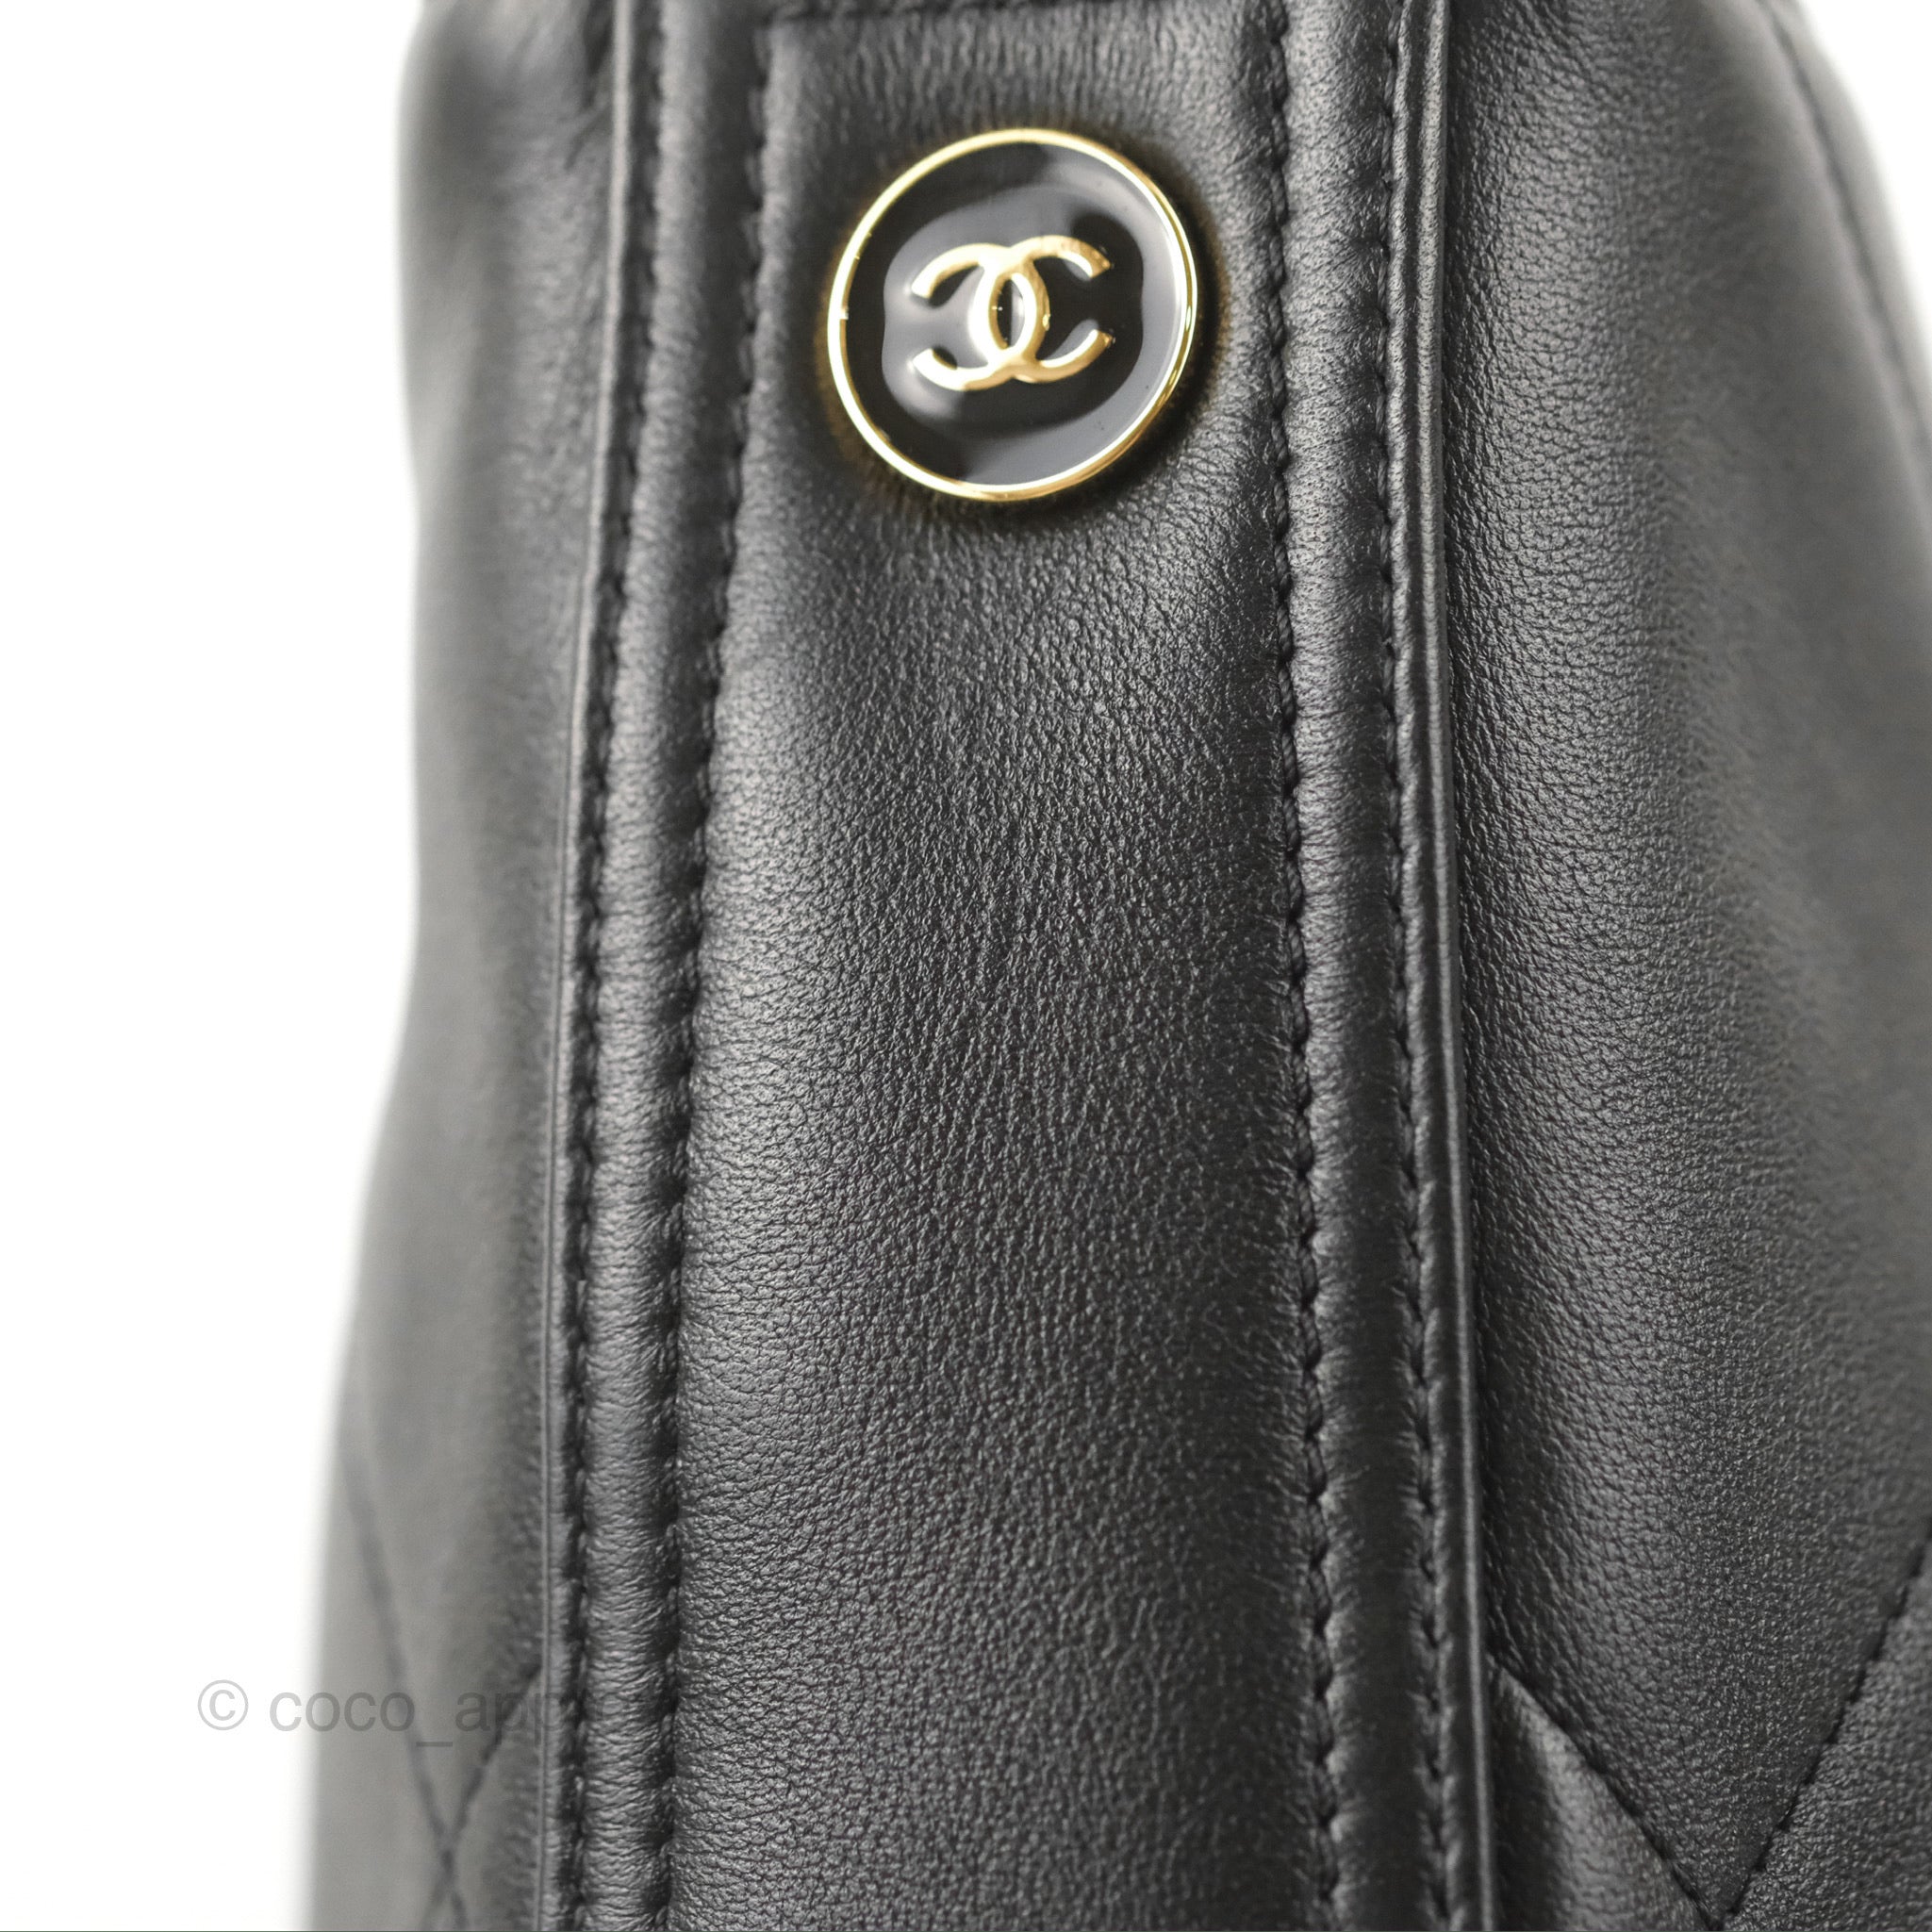 Chanel Large Stitched Easy Mood Hobo Black Calfskin – Coco